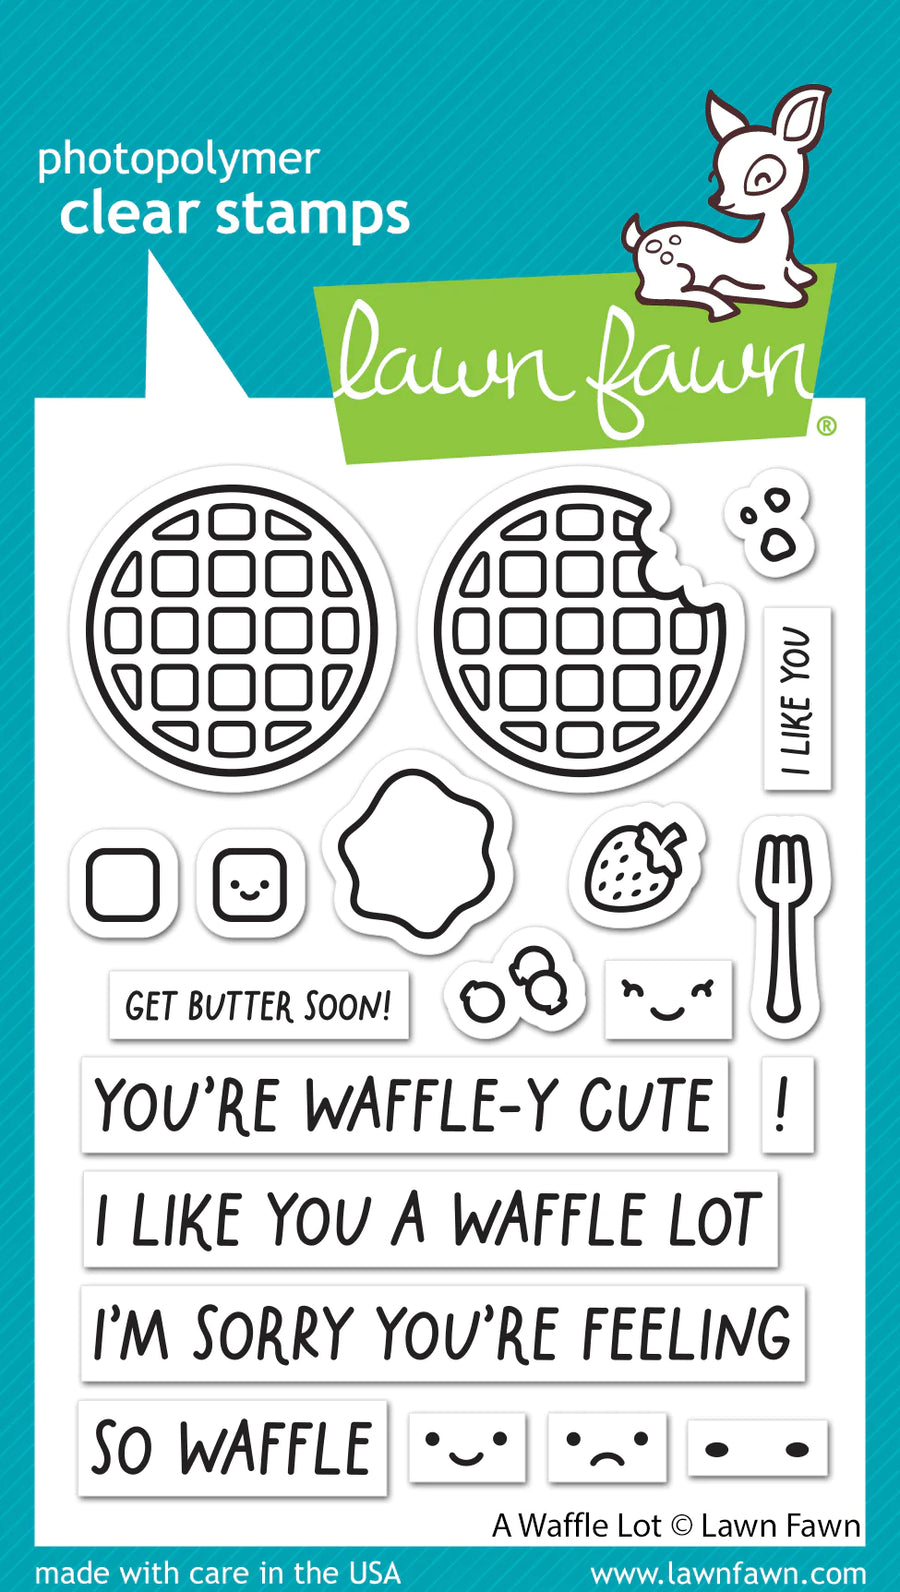 Lawn Fawn - Clear Stamps - A Waffle Lot